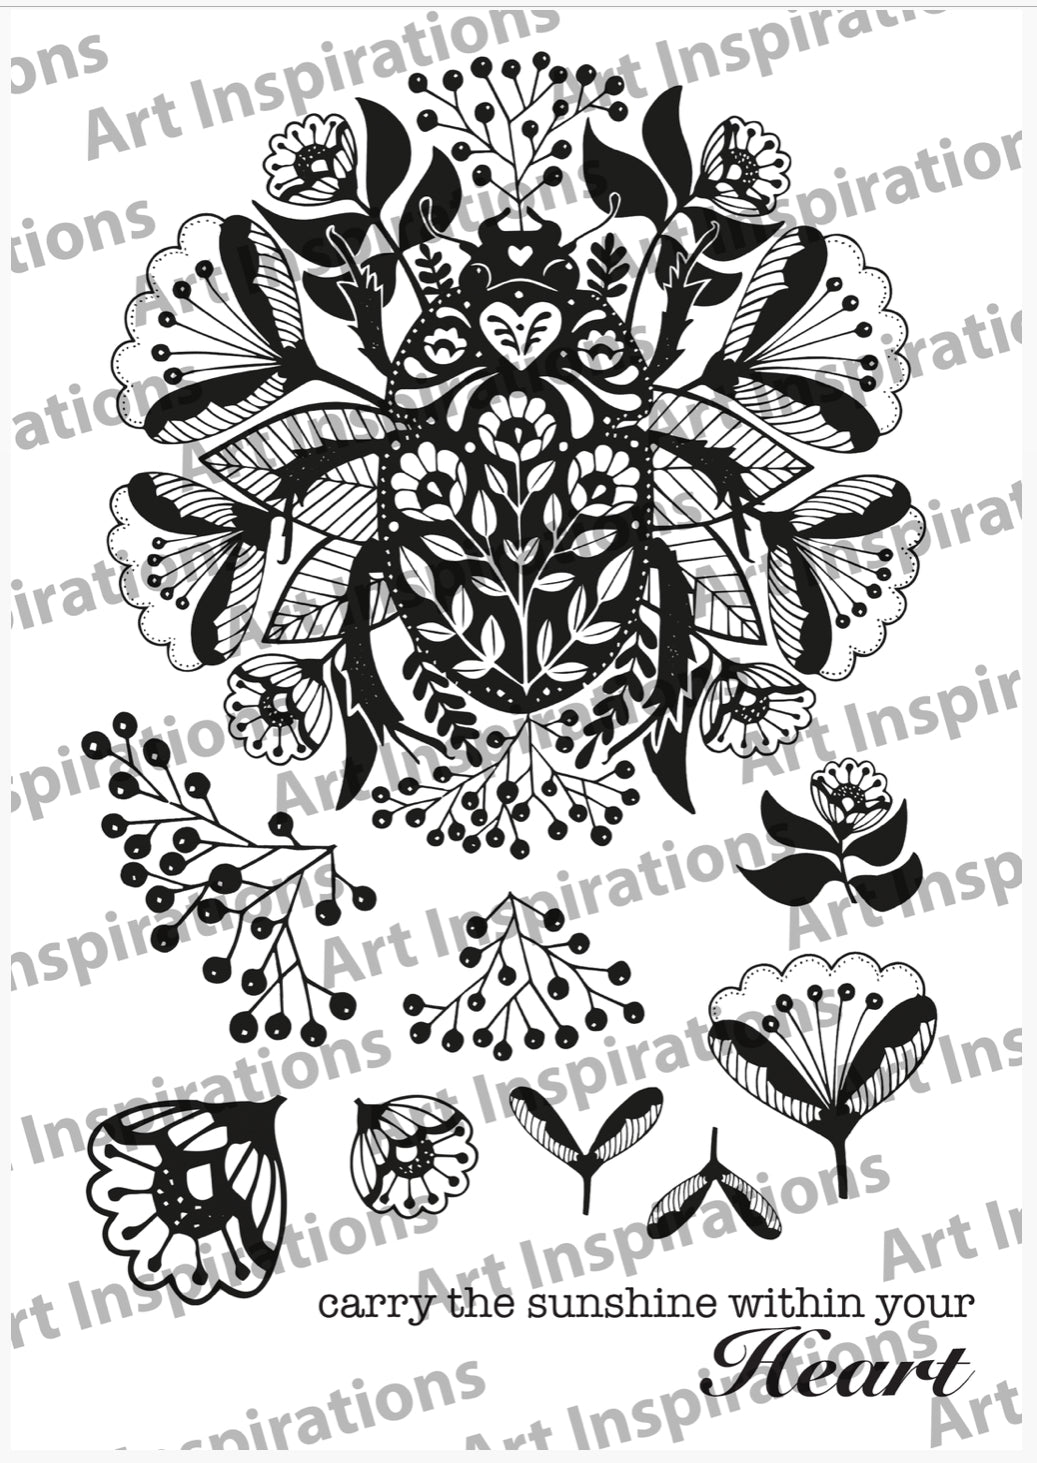 Art Inspirations by Wensdi Made A5 Clear Stamp Sheet - Sunshine Within Your Heart - 10 Stamps